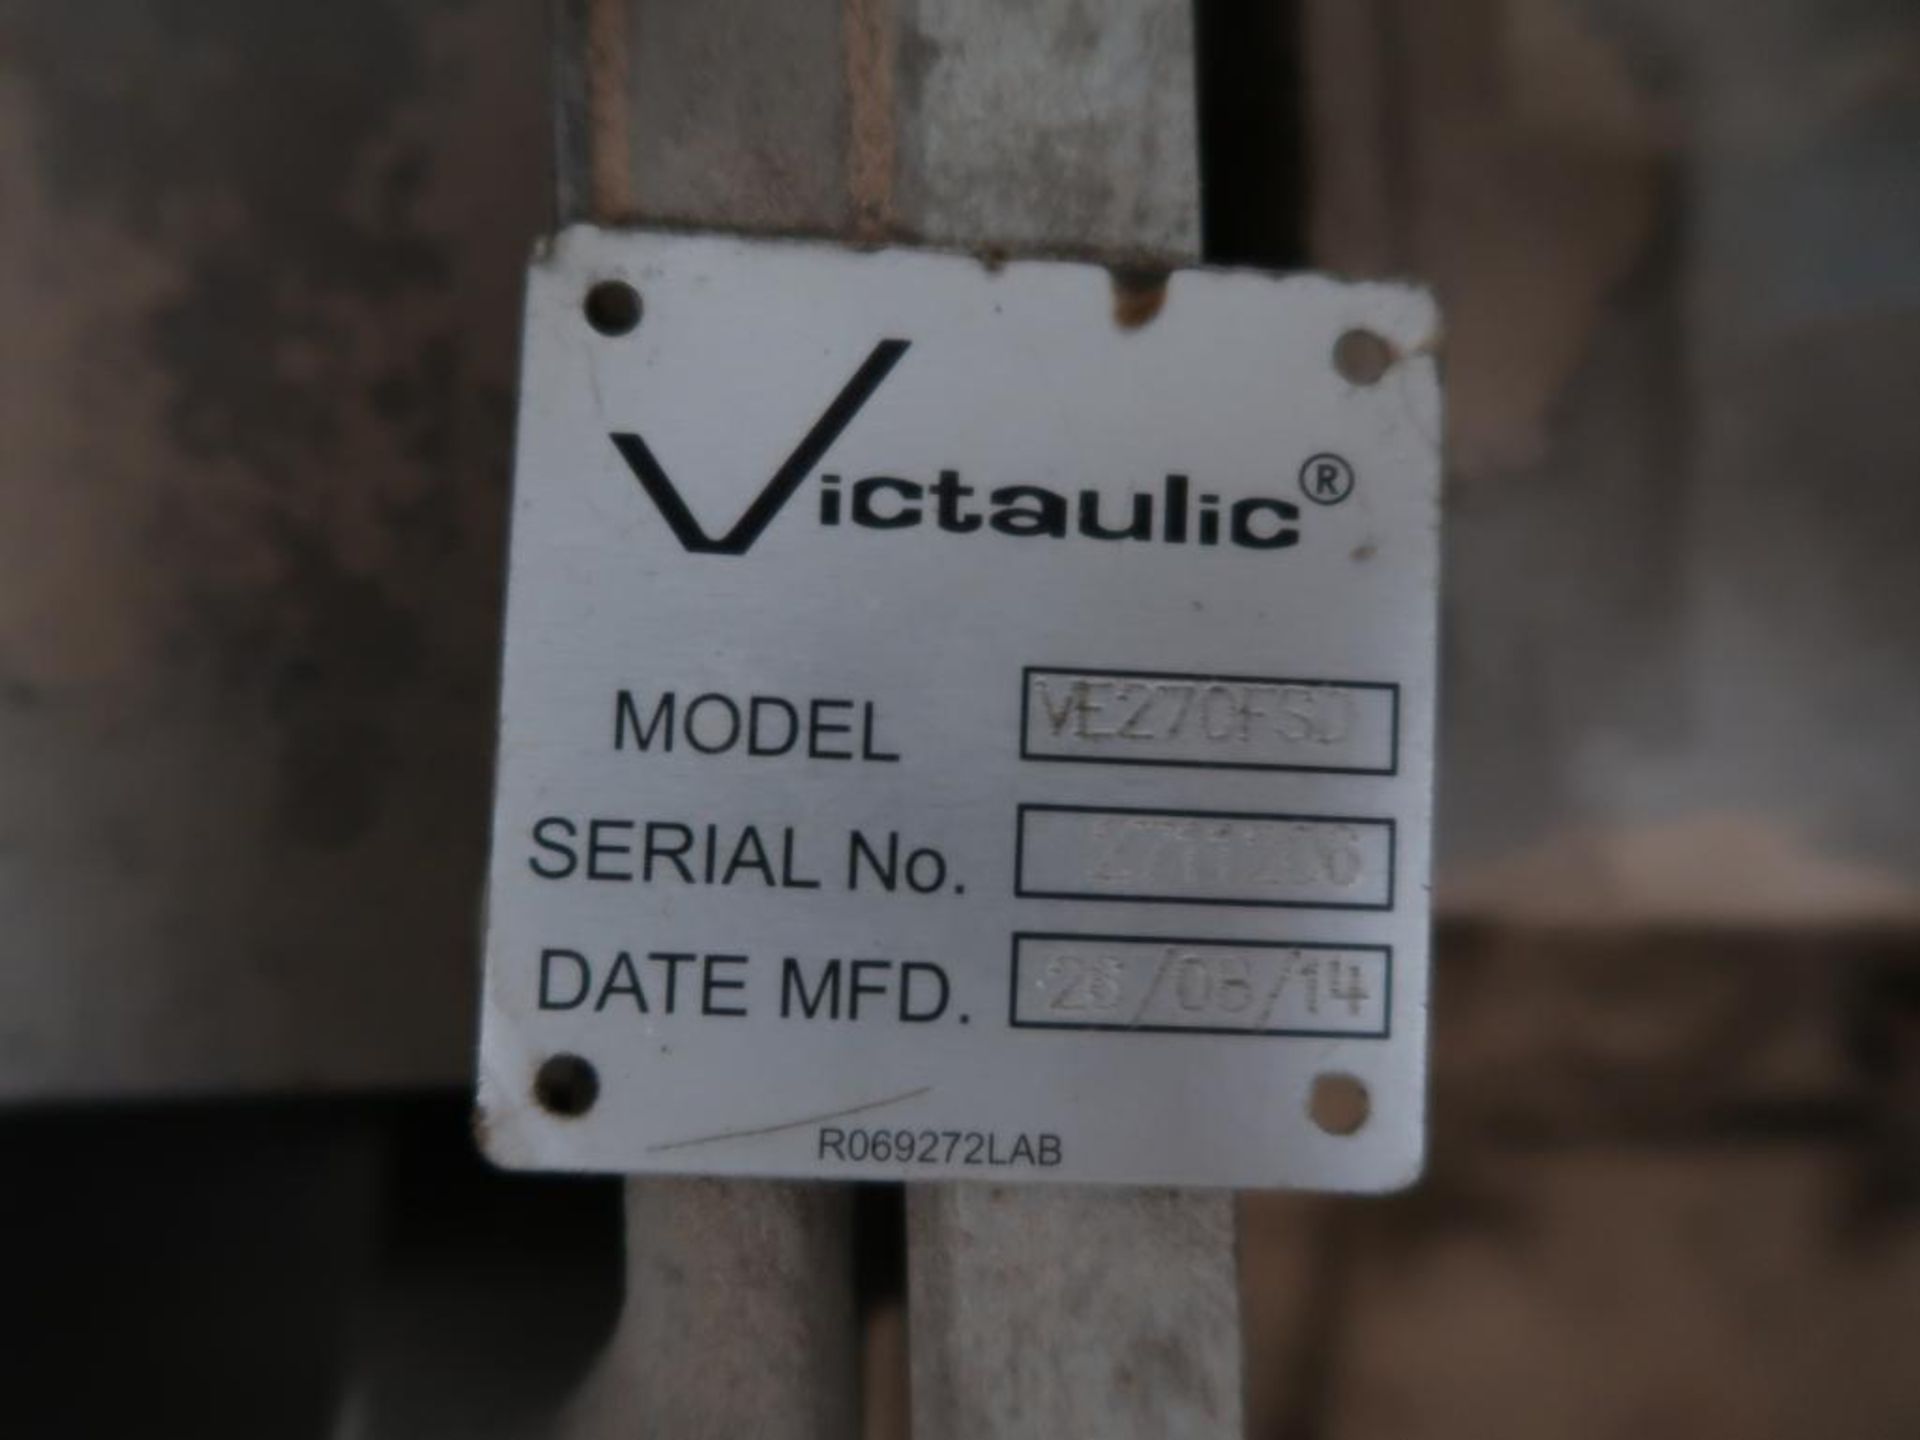 VICTAULIC ROLL GROOVE TOOL MODEL VE270FSD, S/N 2711206, 8/14 ON STEEL BASE - Image 3 of 3